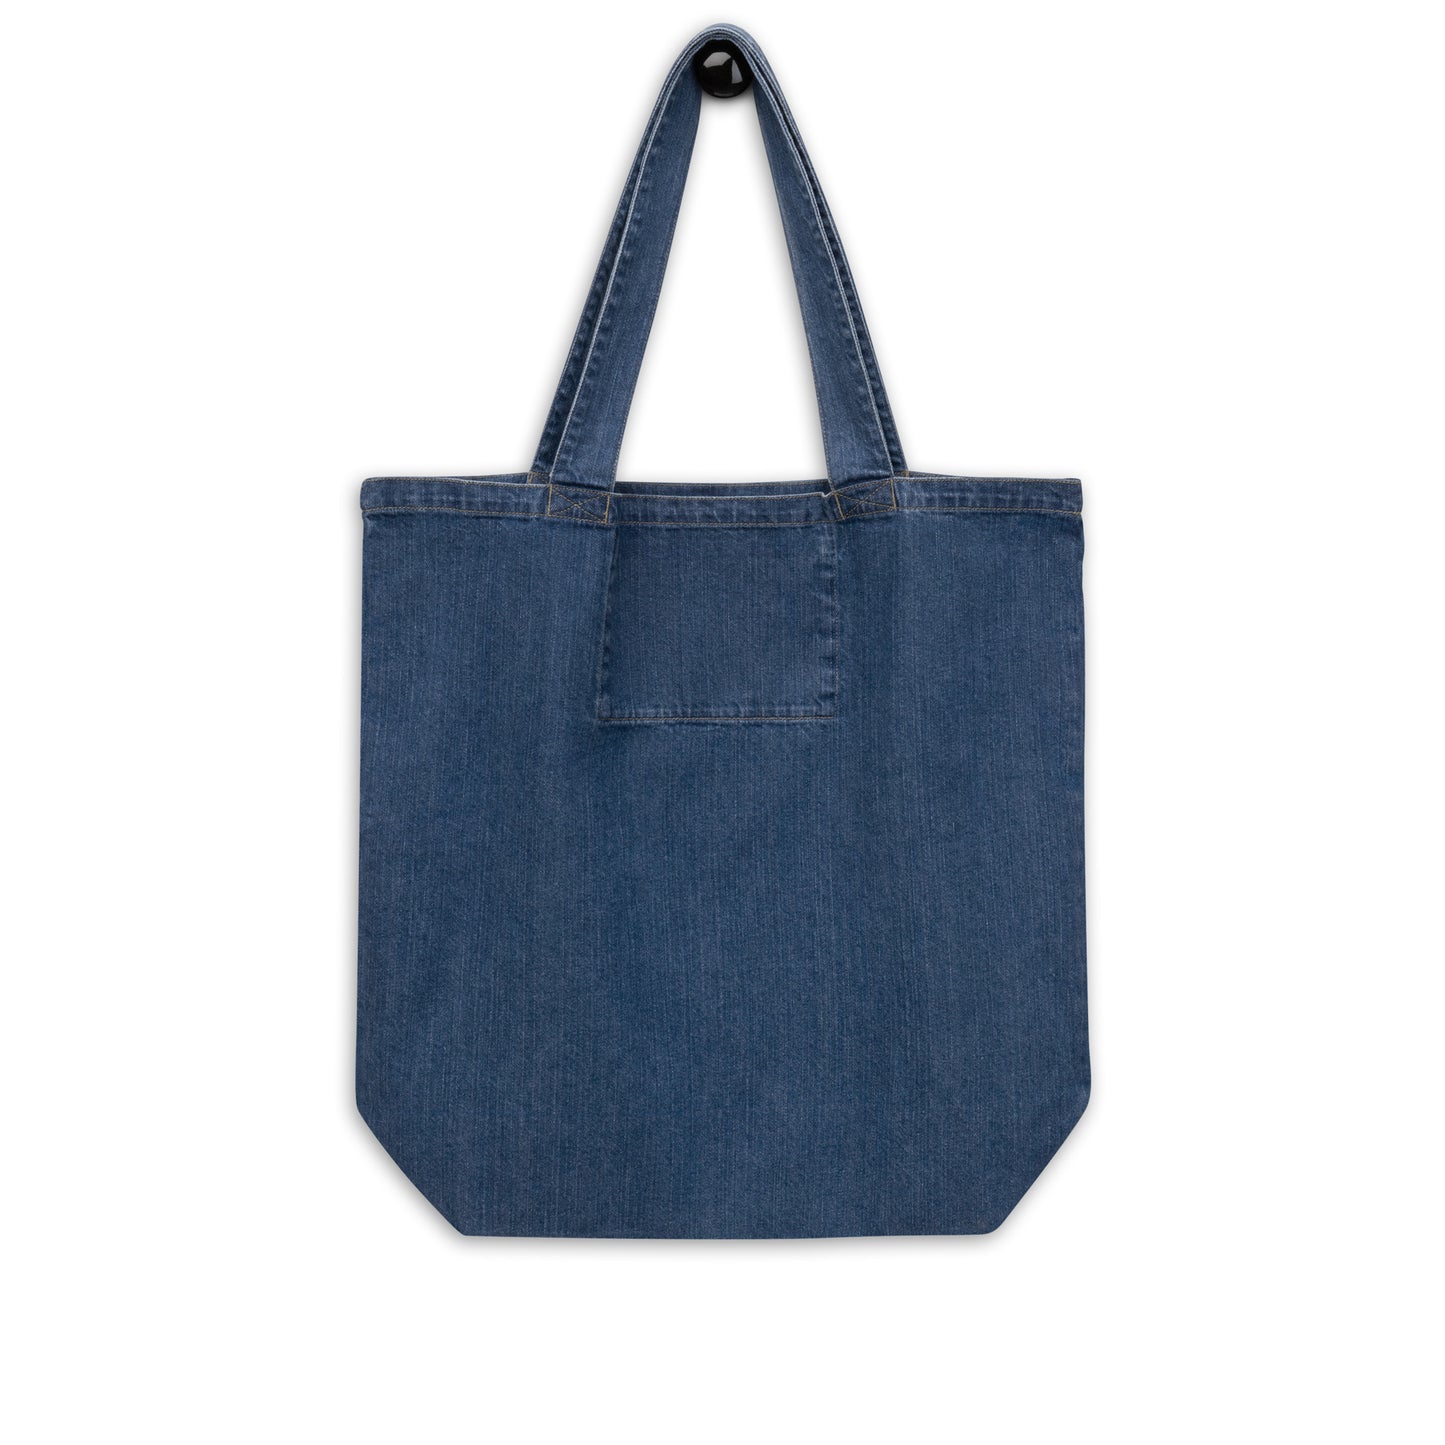 TWO FACED Embroidered Denim Tote Bag - ParrisPieces